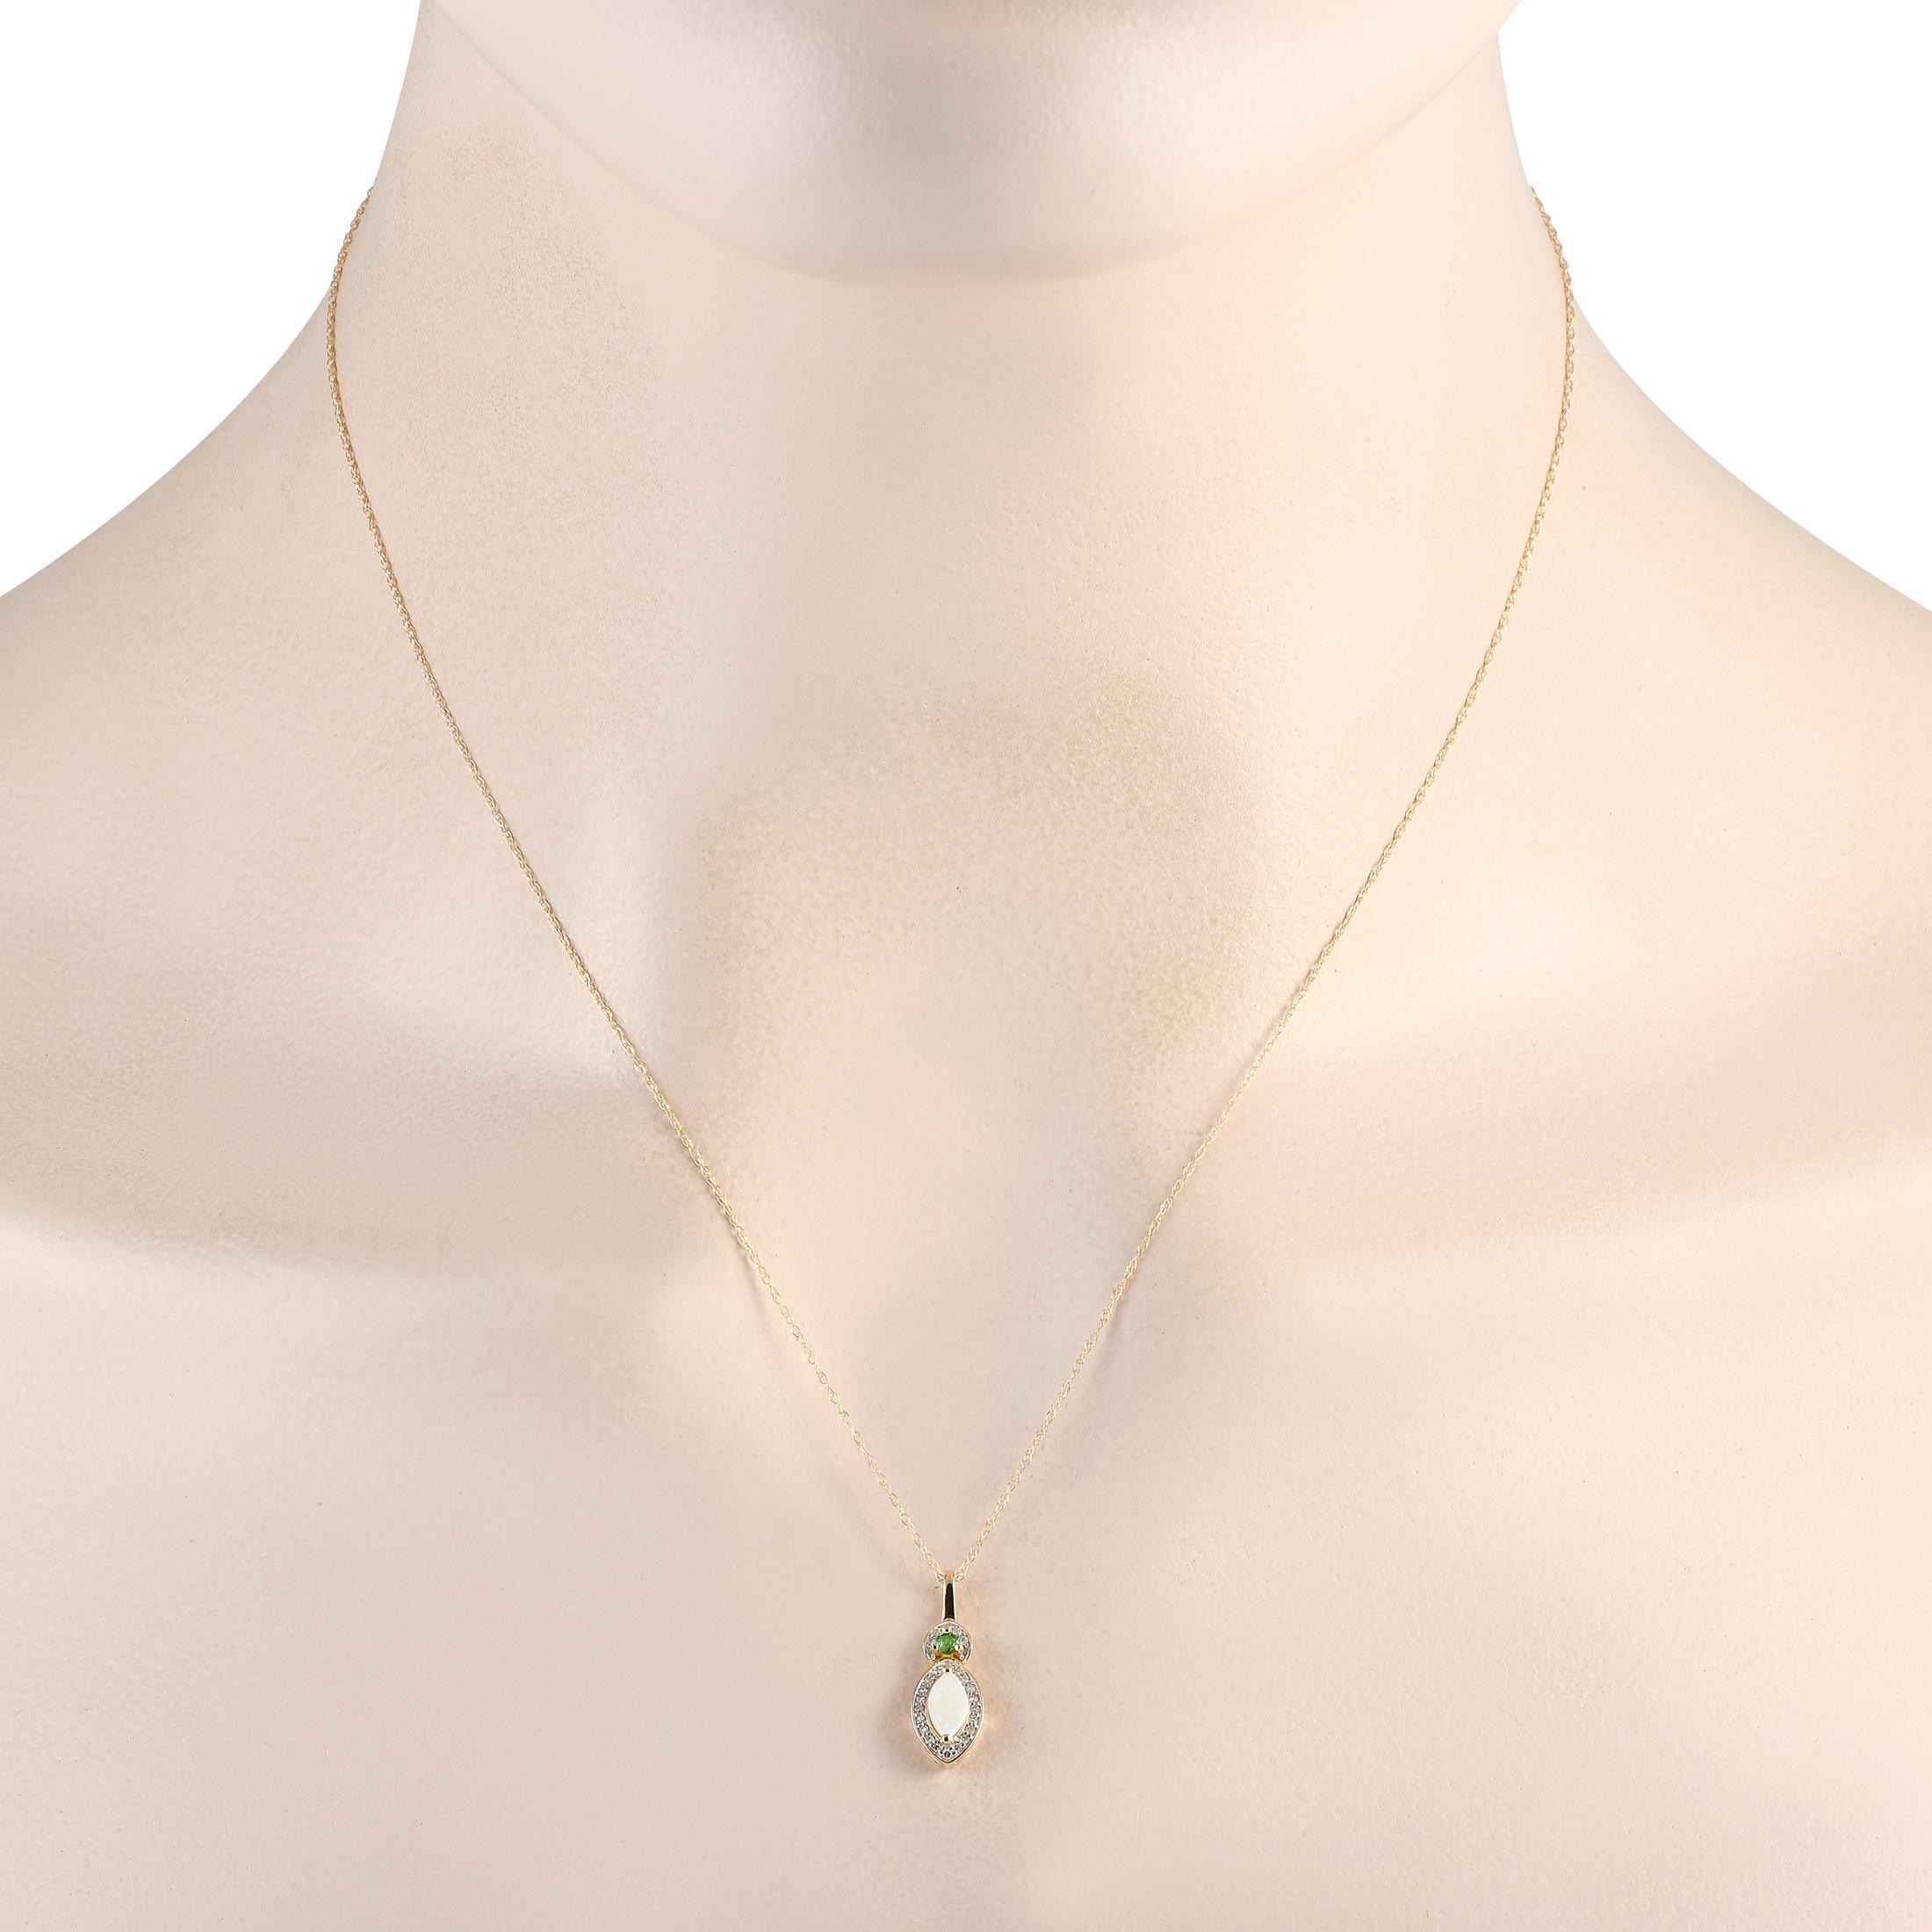 A stunning combination of gemstones makes this elegant necklace the perfect accessory. On this impeccably crafted piece of jewelry, a fiery opal, an emerald gemstone, and diamonds with a total weight of 0.07 carats come together in perfect harmony.